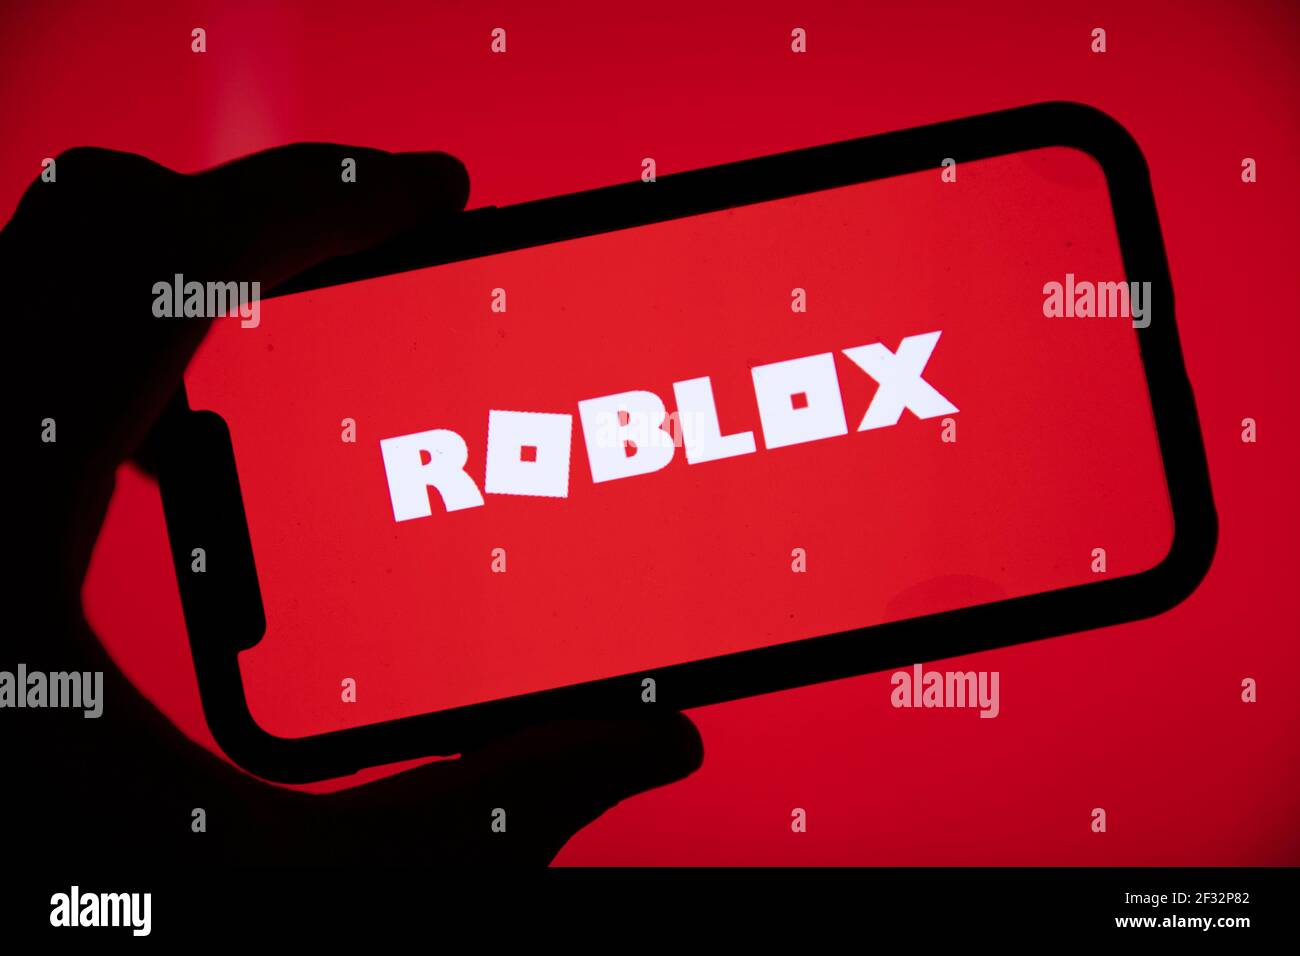 London Uk March 2021 Person Holding A Smartphone With Roblox Game Logo Stock Photo Alamy - how large is a roblox game logo